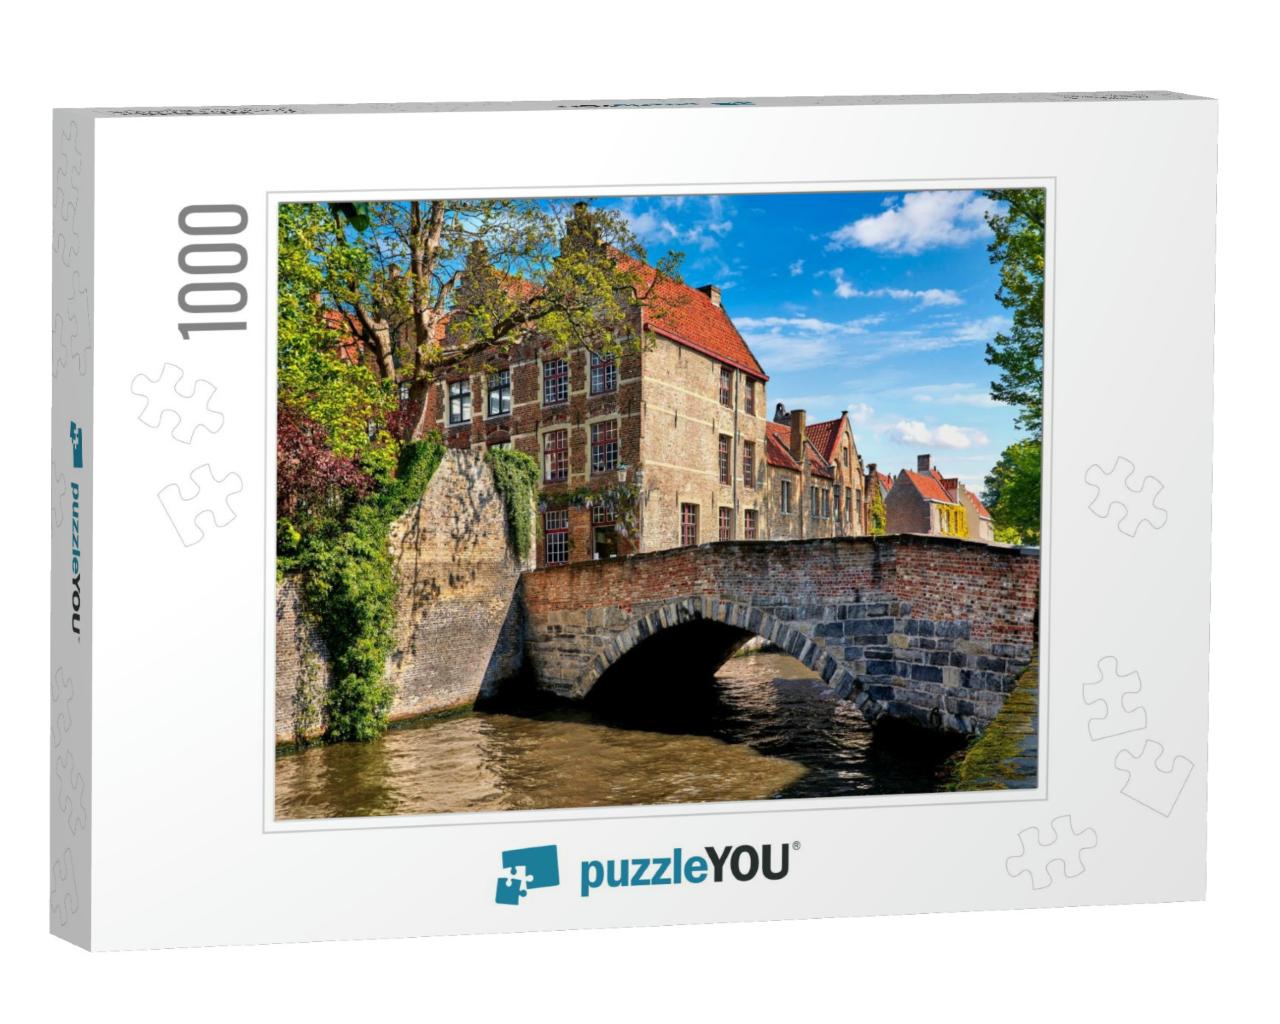 Bruges Belgium Vintage Stone Houses & Bridge Over Canal A... Jigsaw Puzzle with 1000 pieces